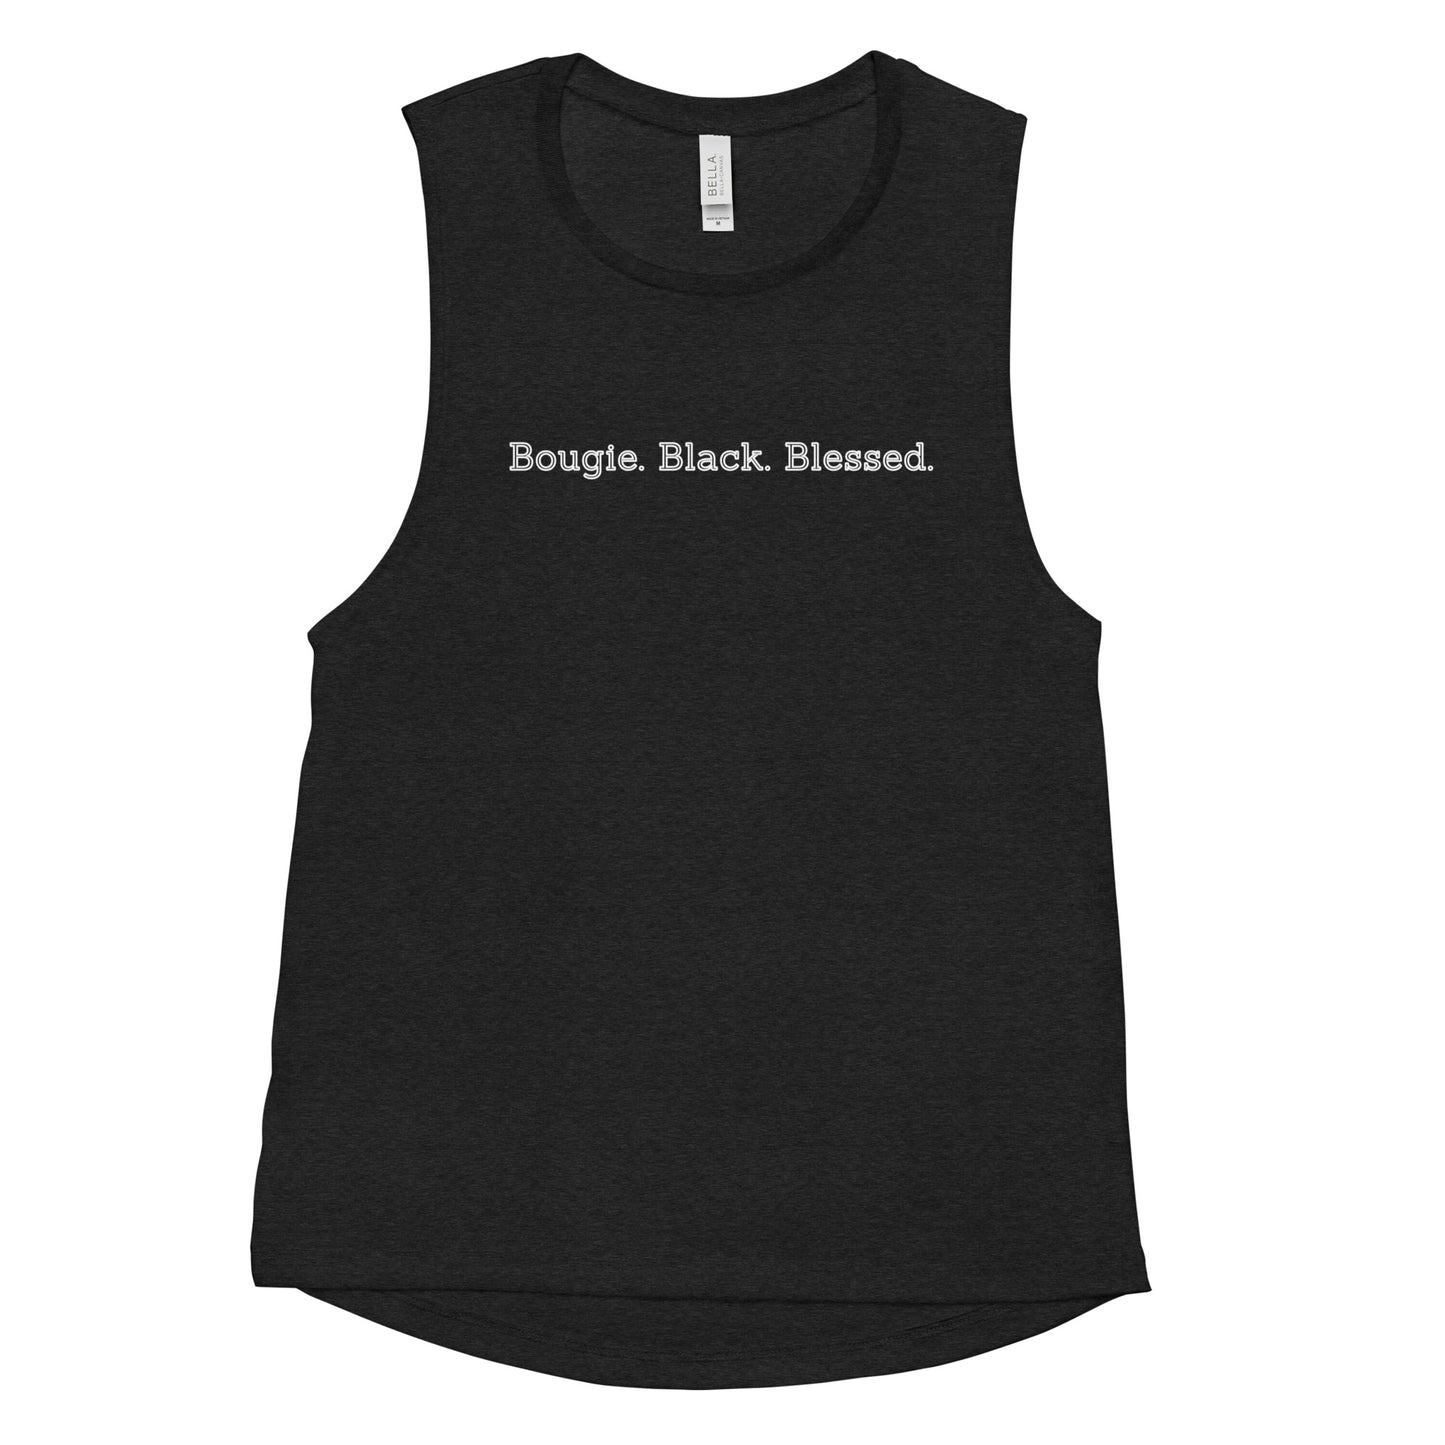 Bougie. Black. Blessed. Muscle Tank